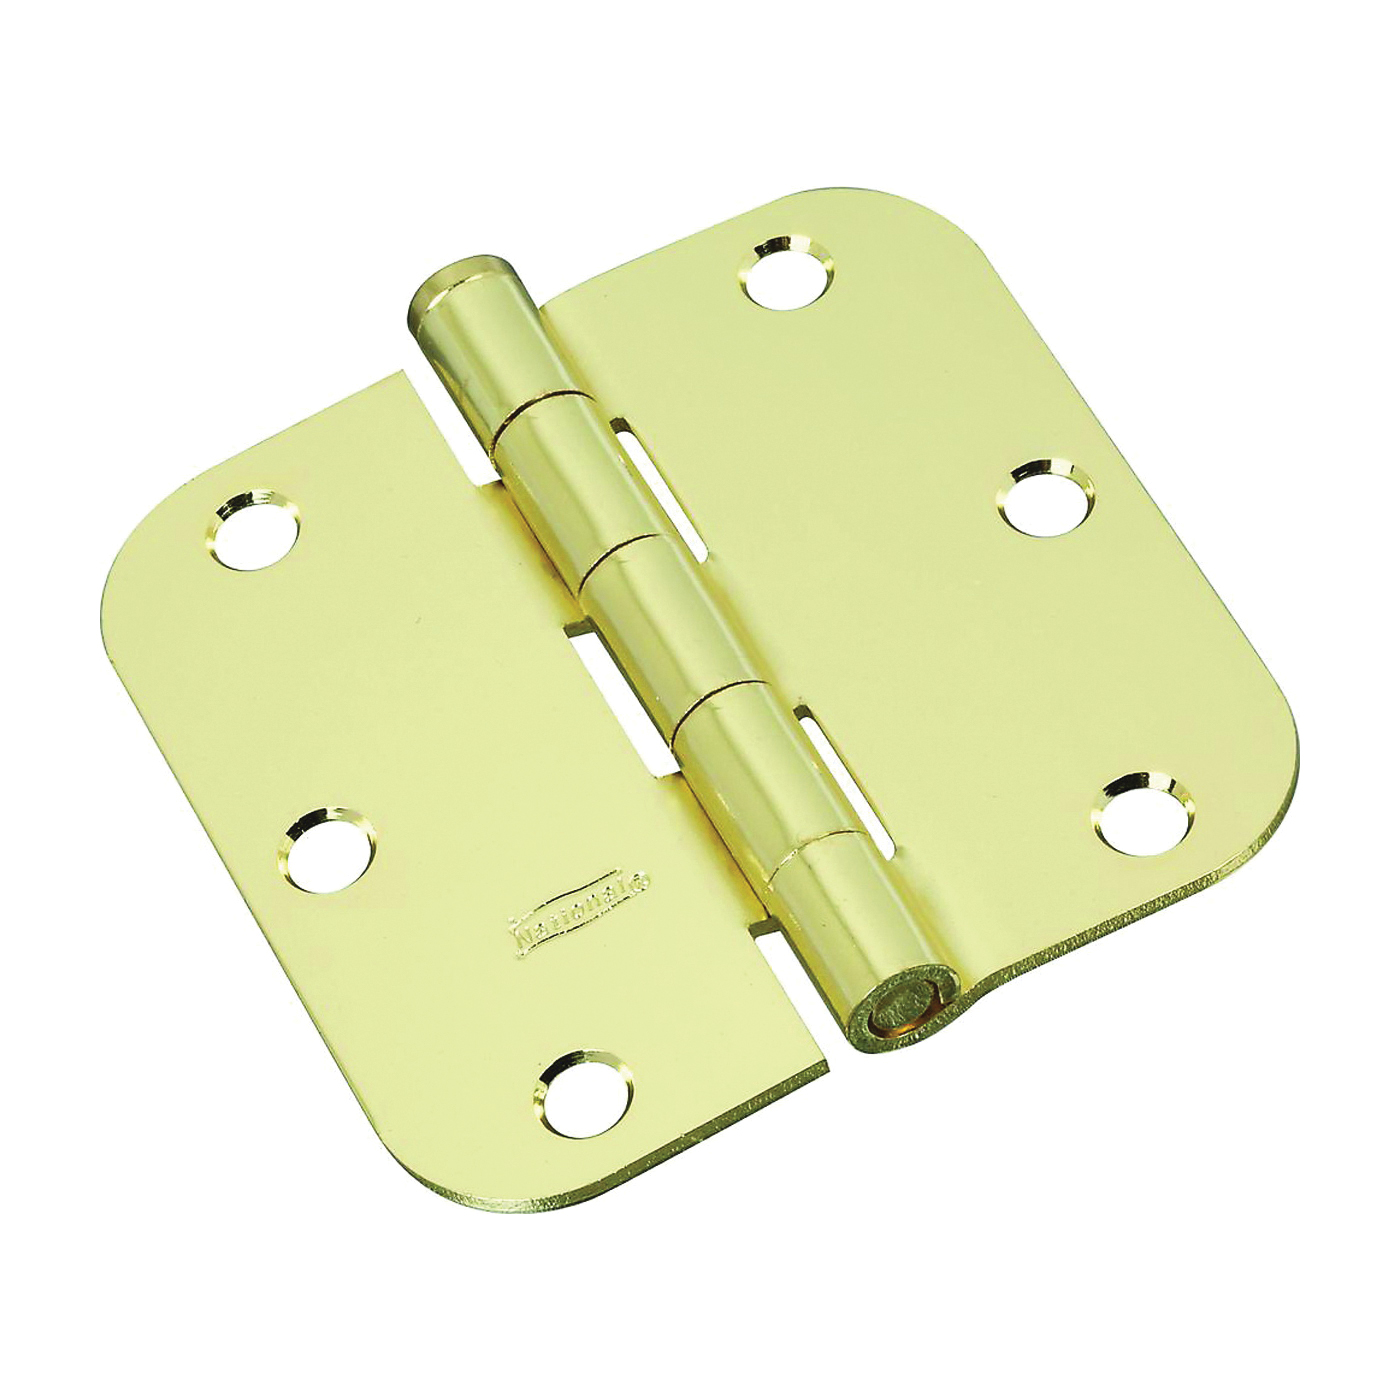 N830-207 Door Hinge, Cold Rolled Steel, Polished Brass, Non-Rising, Removable Pin, 55 lb